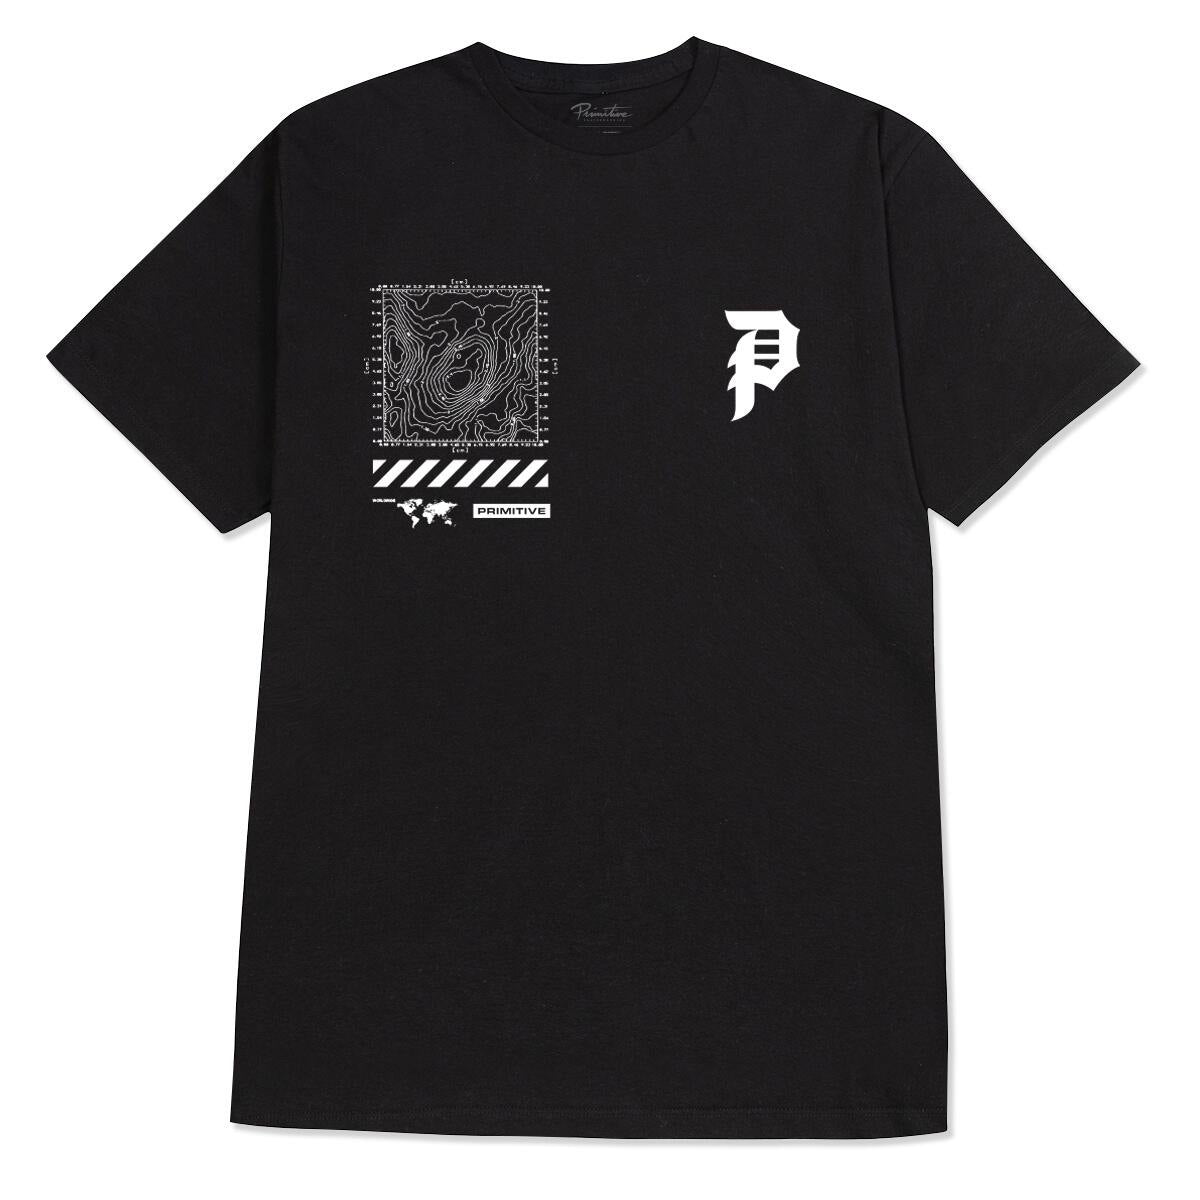 Primitive x Call Of Duty Mapping Dirty P T-Shirt - Black